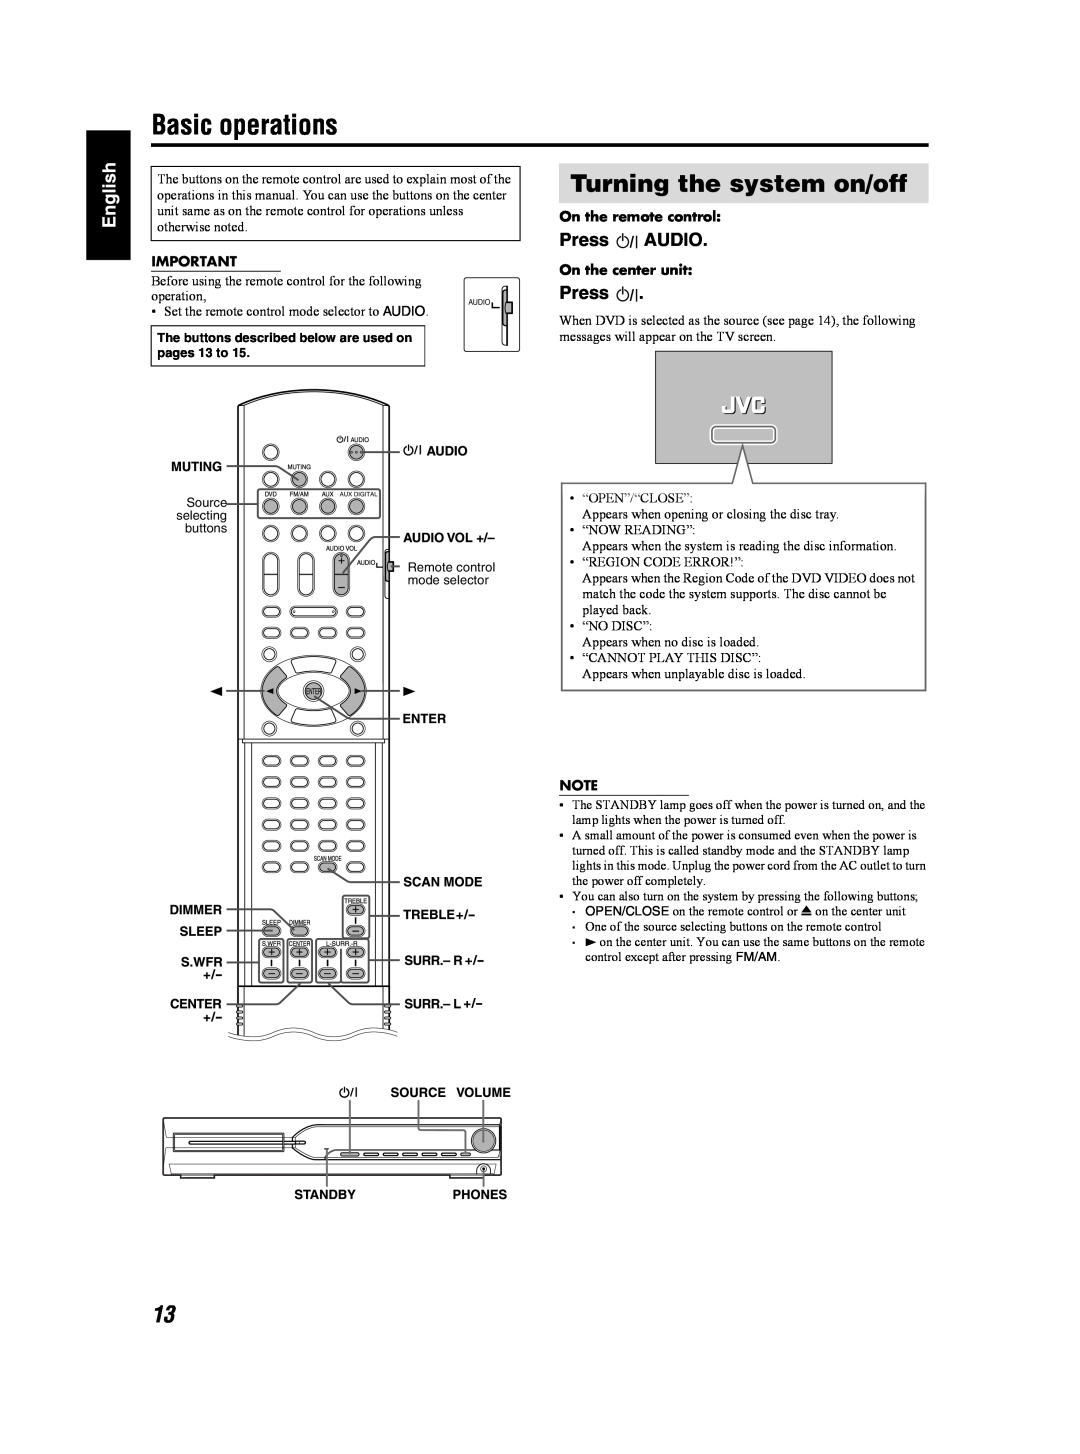 JVC TH-S2, TH-S3 manual Basic operations, Turning the system on/off, Press AUDIO, On the remote control, On the center unit 